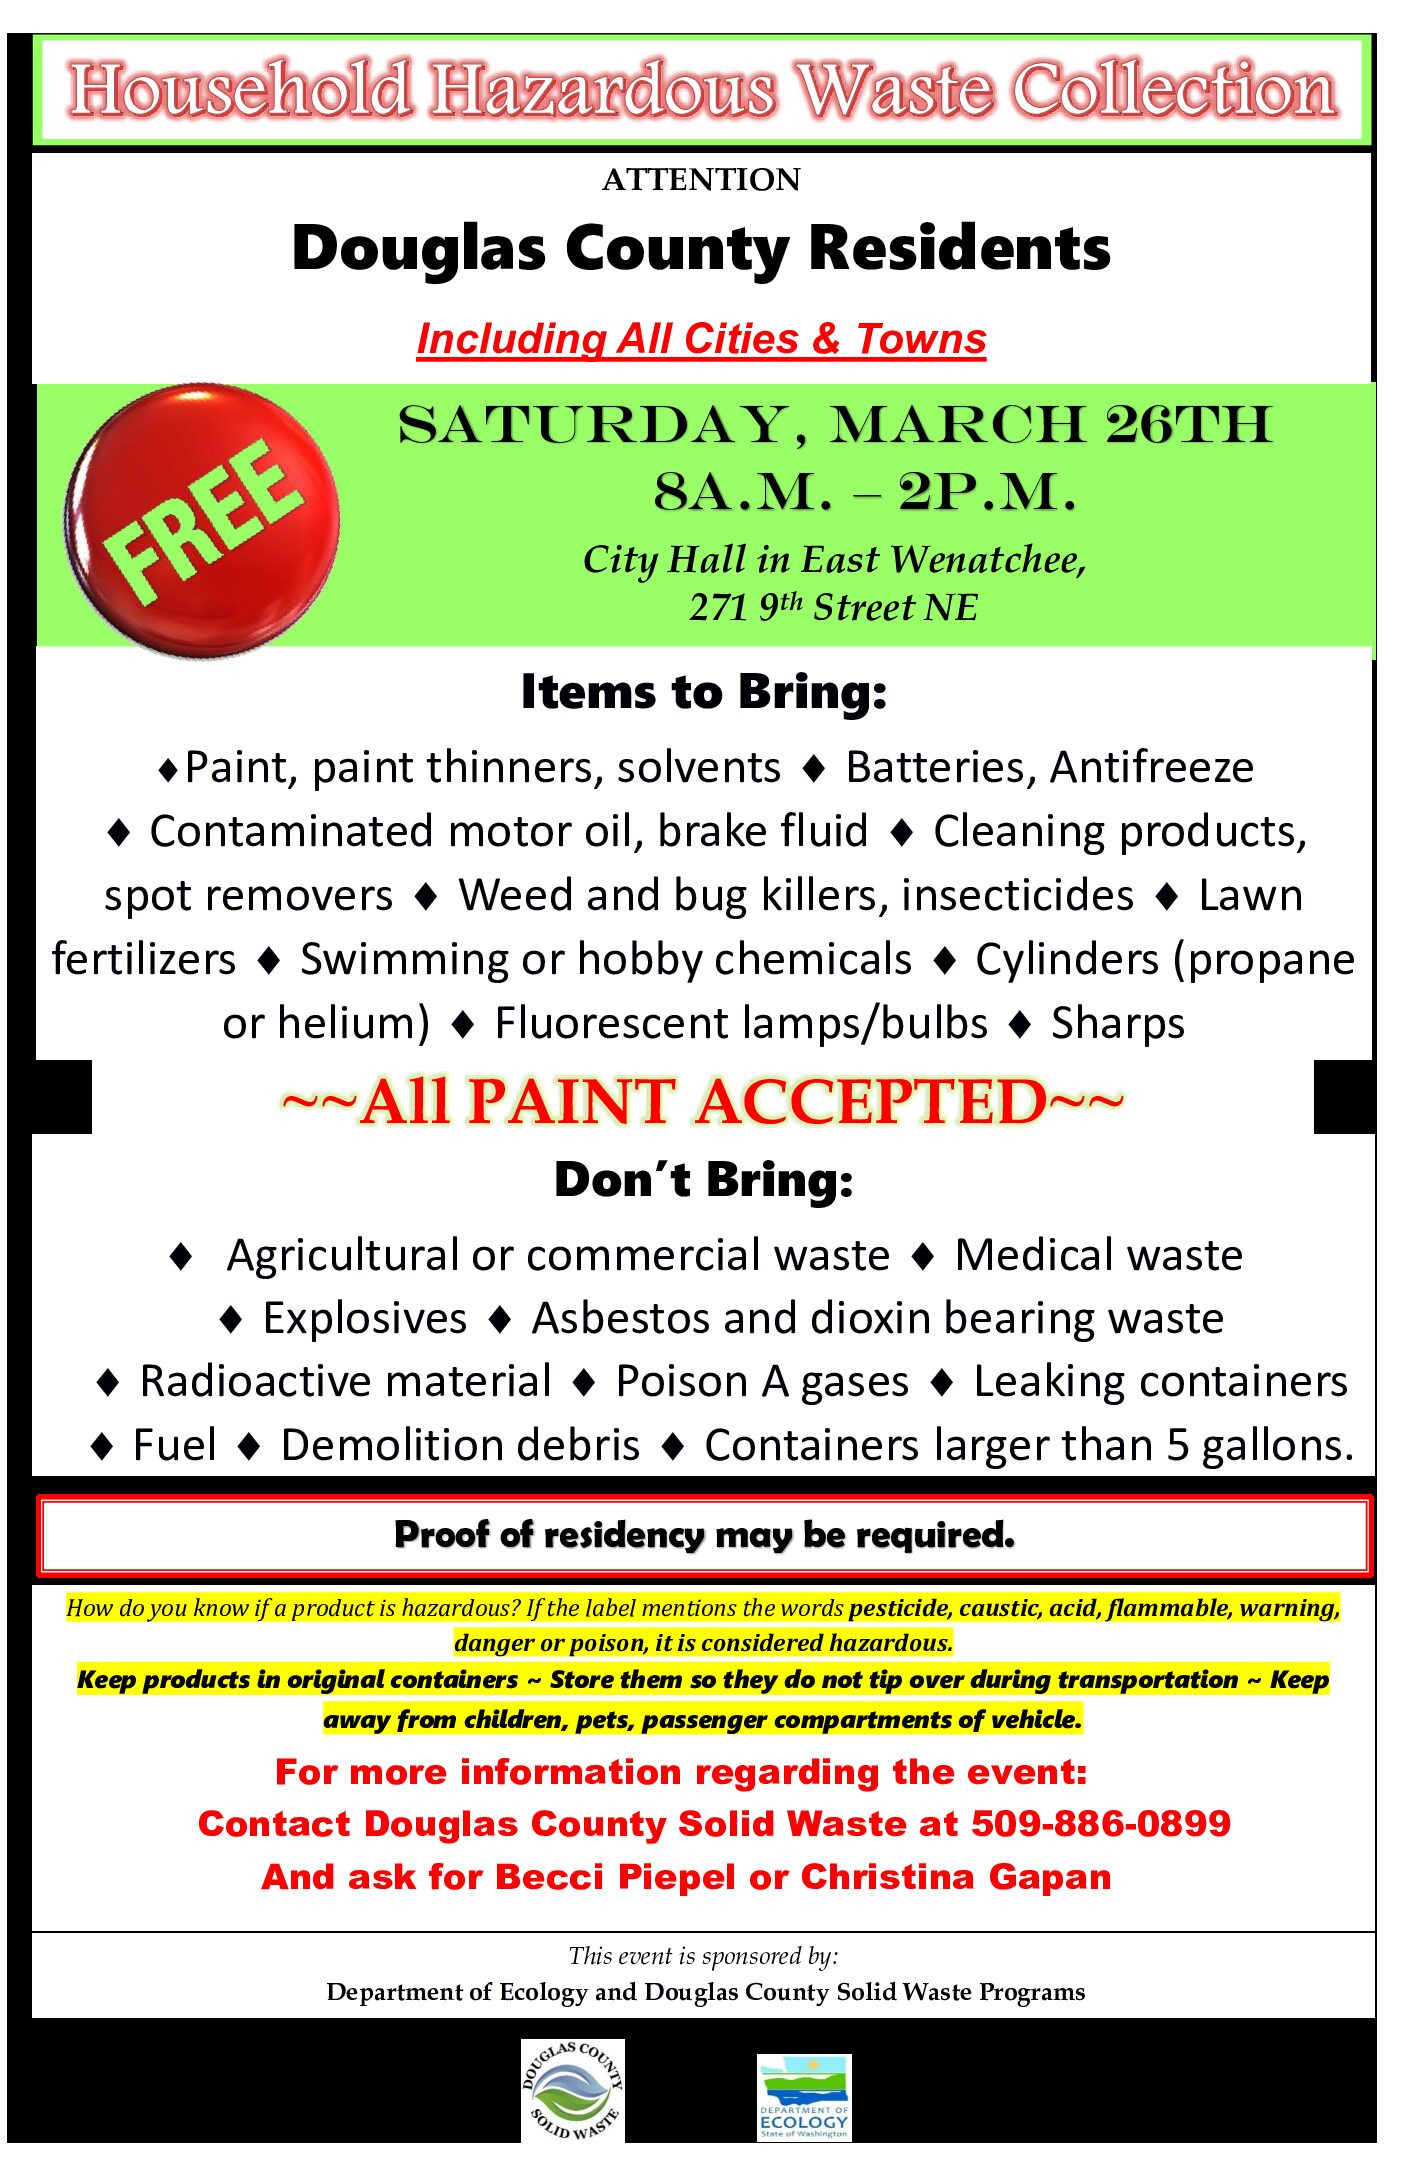 <h1 class="tribe-events-single-event-title">Household Hazardous Waste Collection Event</h1>